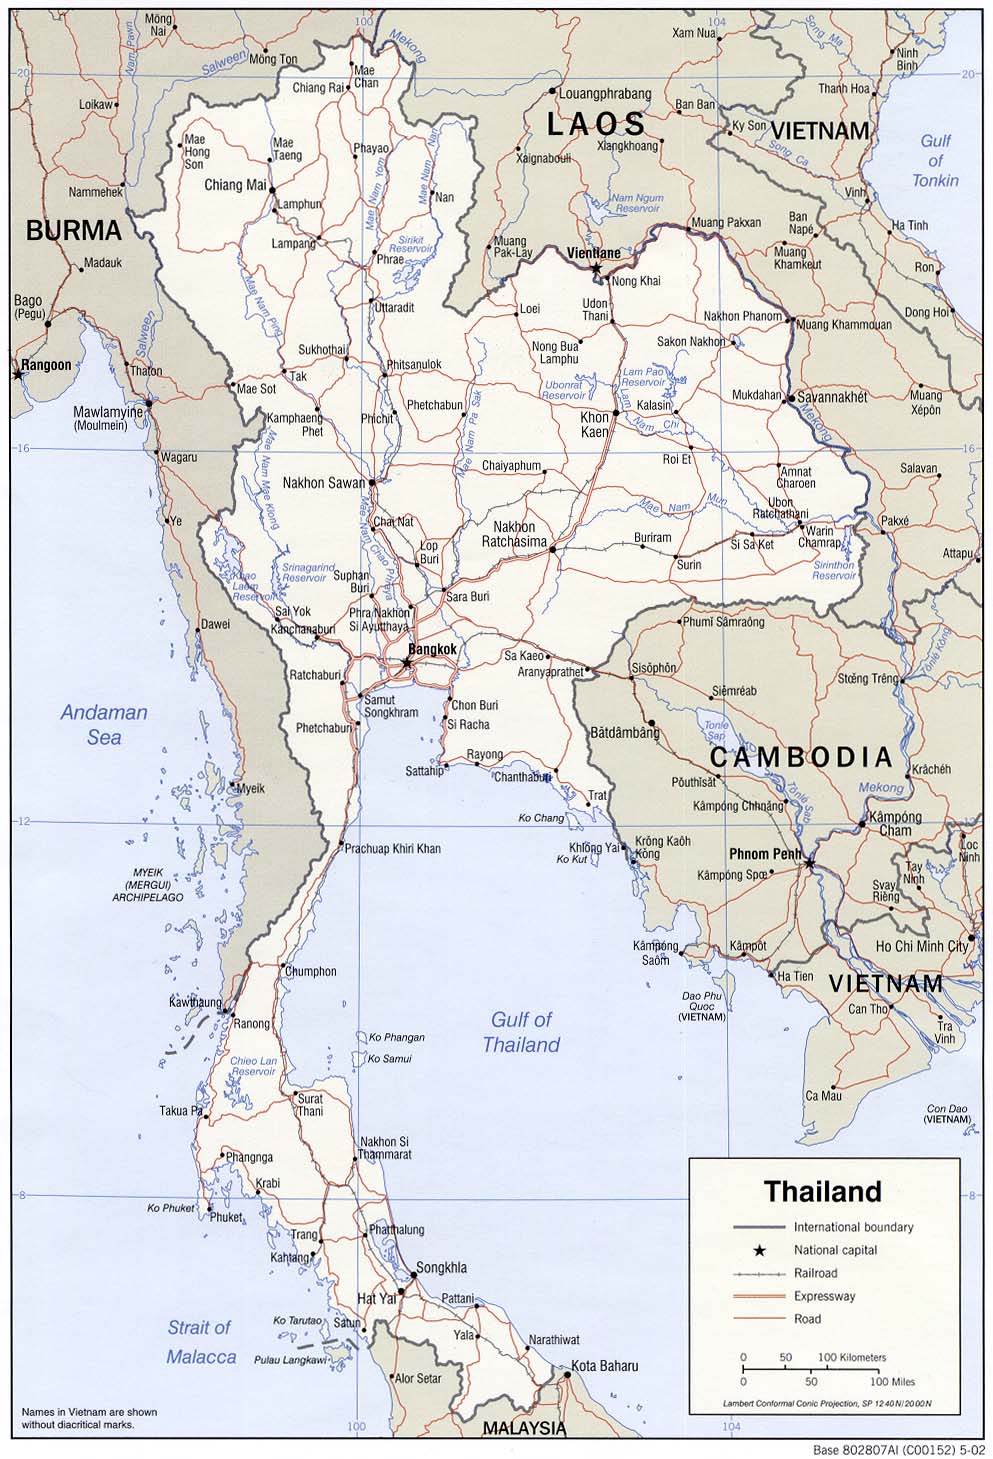 6 free maps of Thailand - ASEAN UP